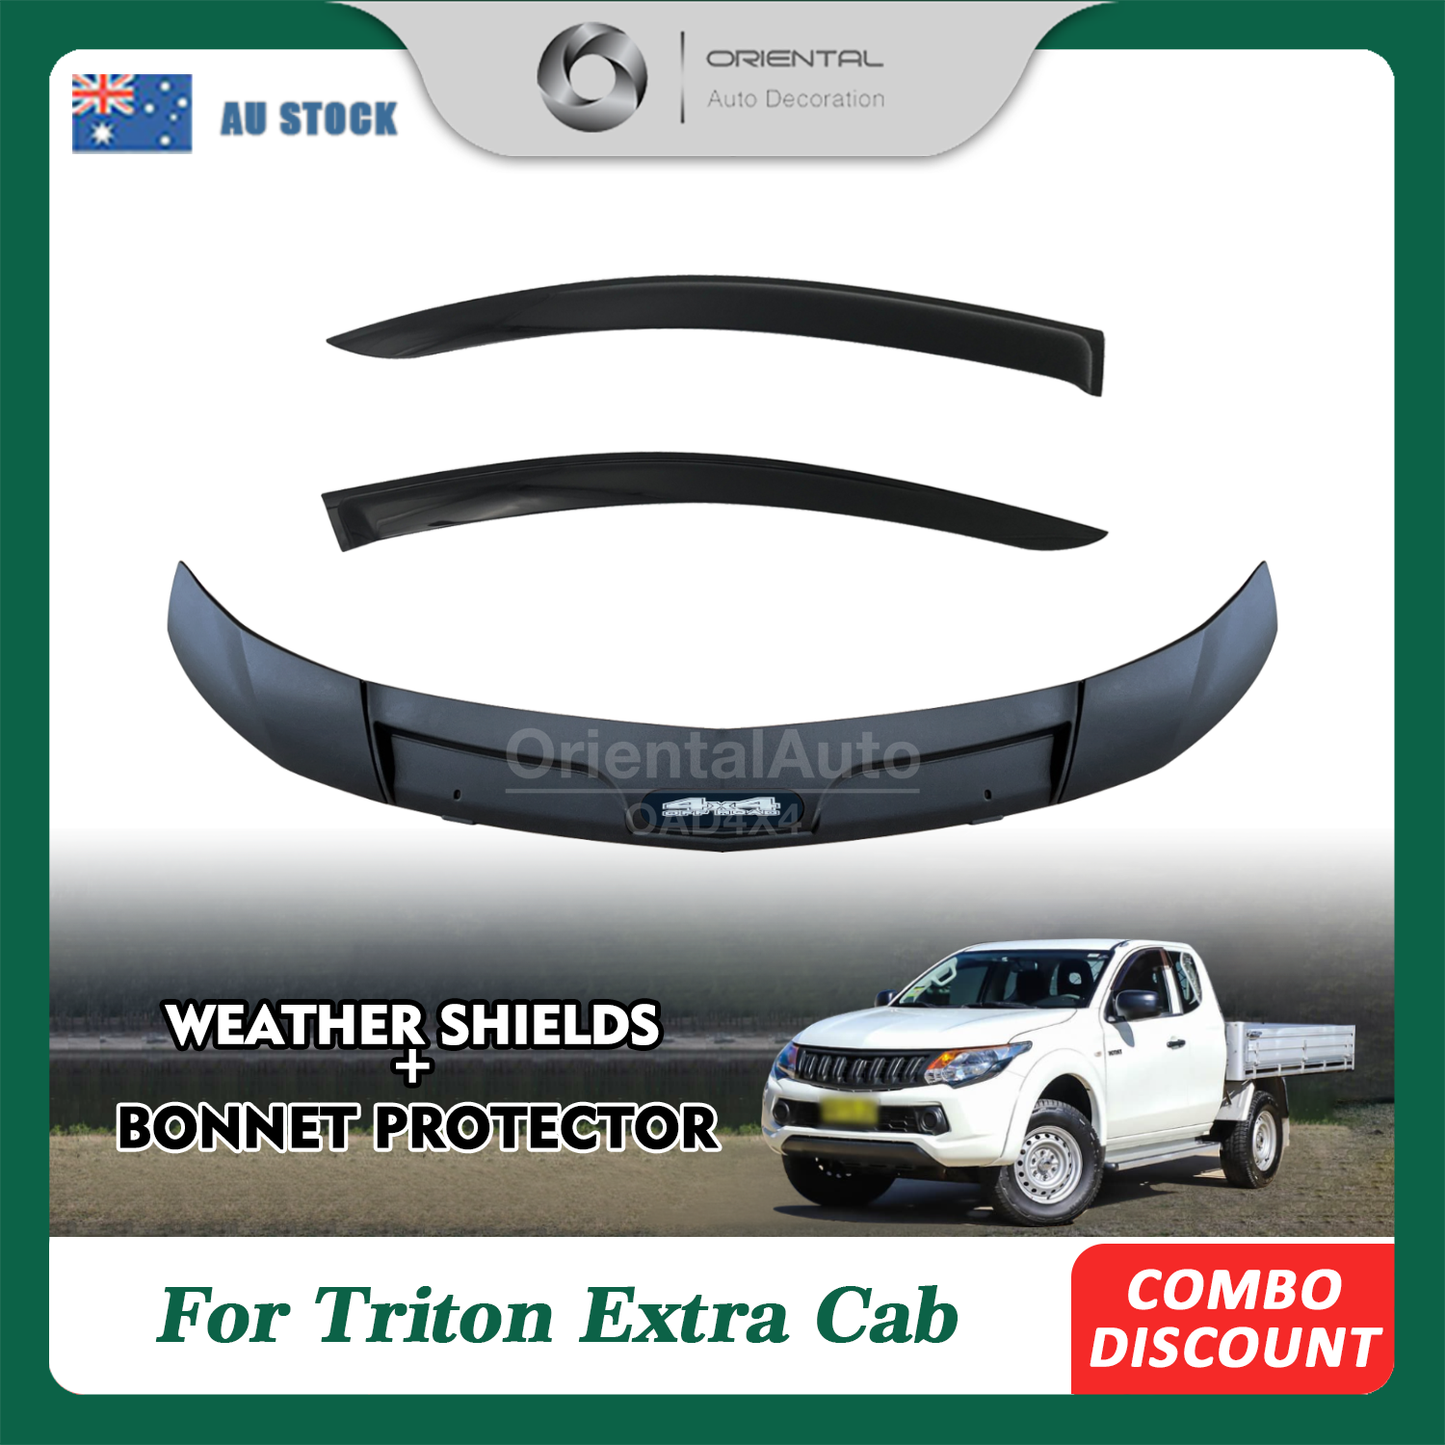 Injection Modeling Bonnet Protector & Injection 2pcs Weathershield for Mitsubishi Triton MQ Extra Cab 2015-2018 Weather Shields Window Visor + Hood Protector Bonnet Guard